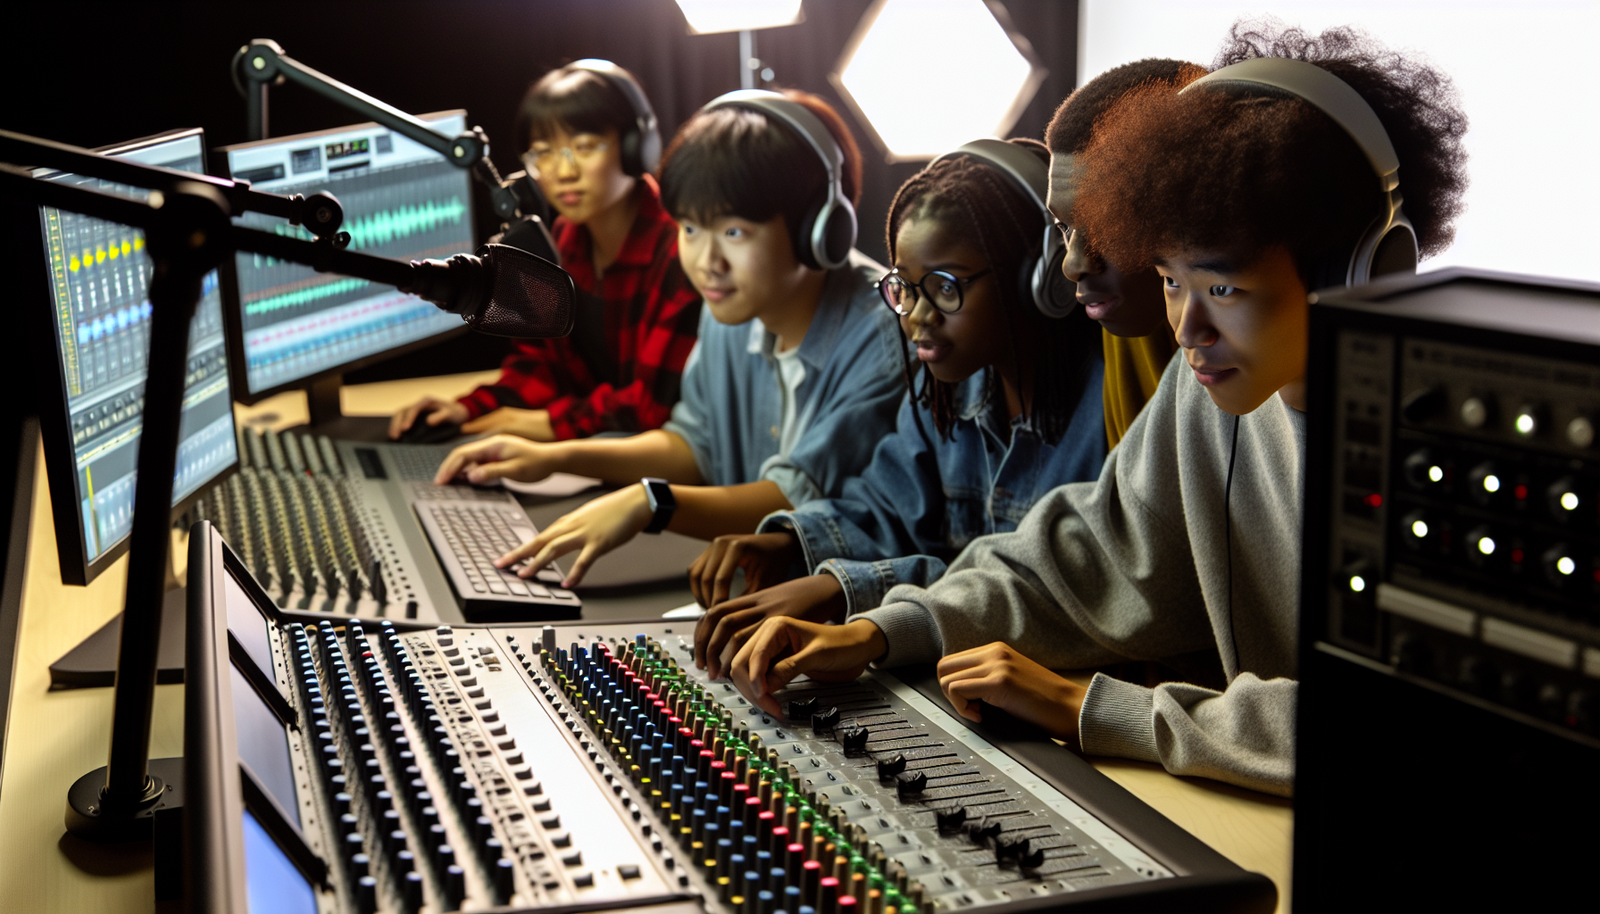 Film students experimenting with sound design in a professional studio